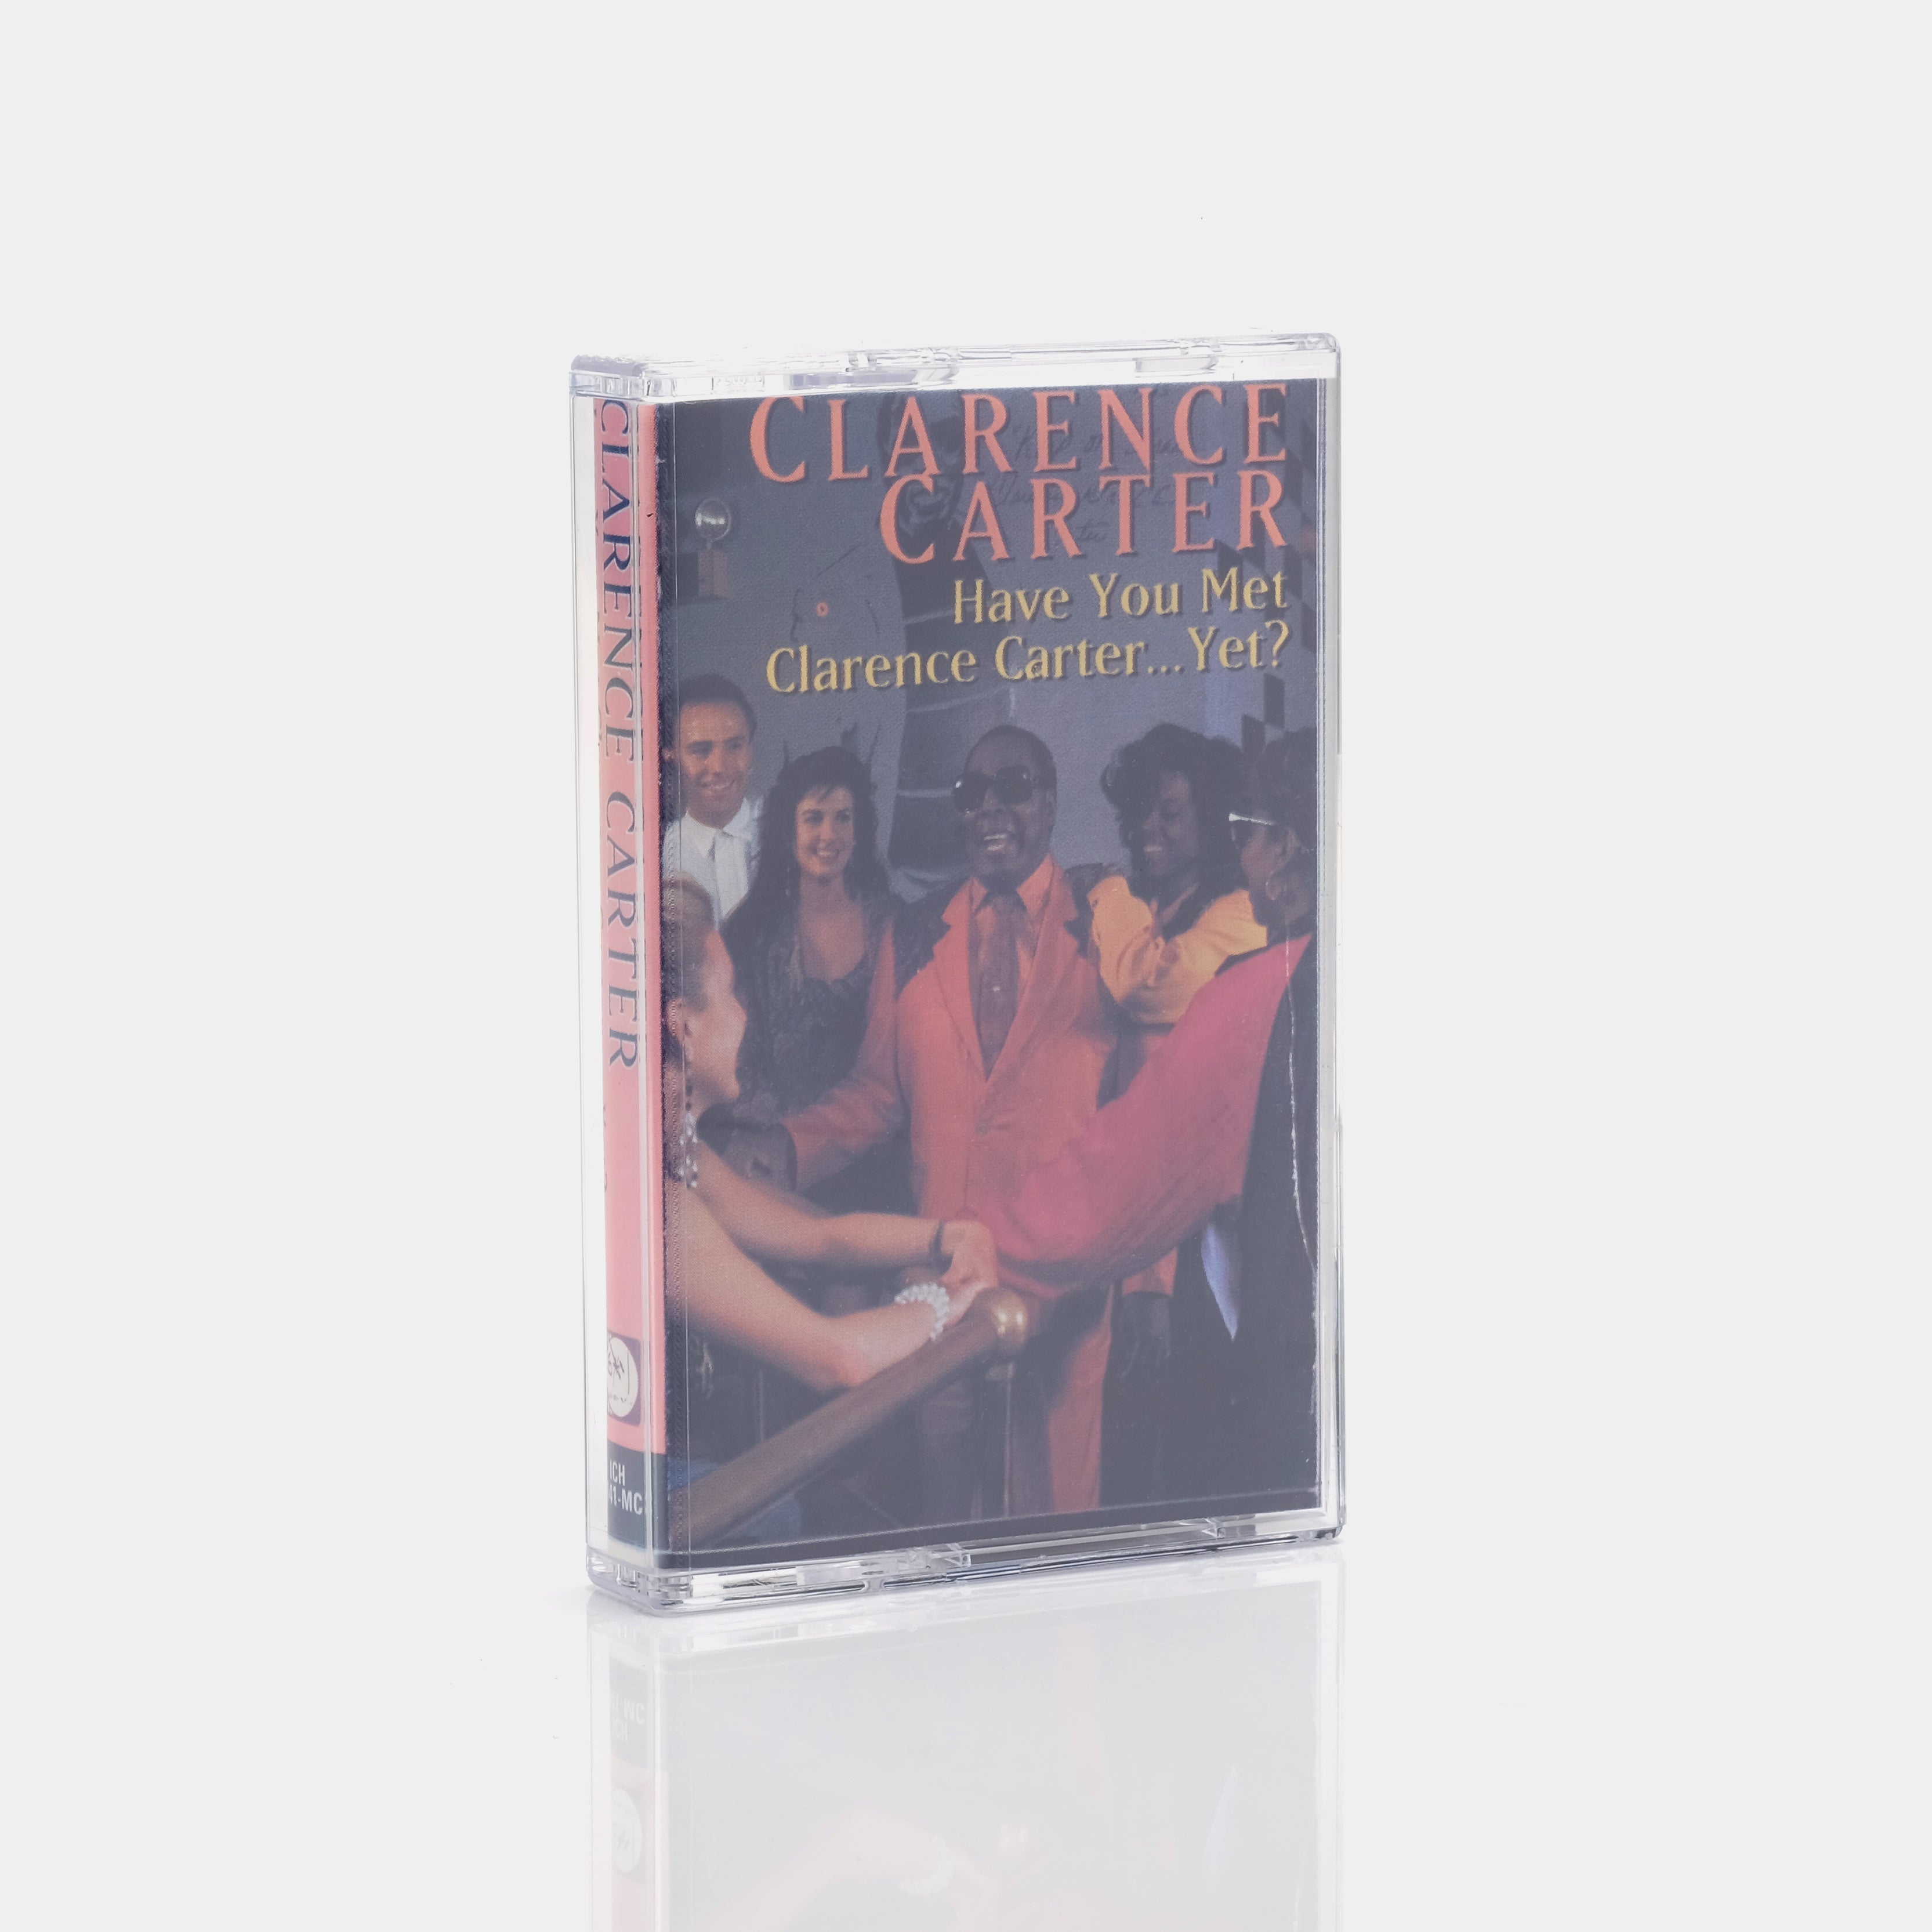 Clarence Carter - Have You Met Clarence Carter...Yet? Cassette Tape